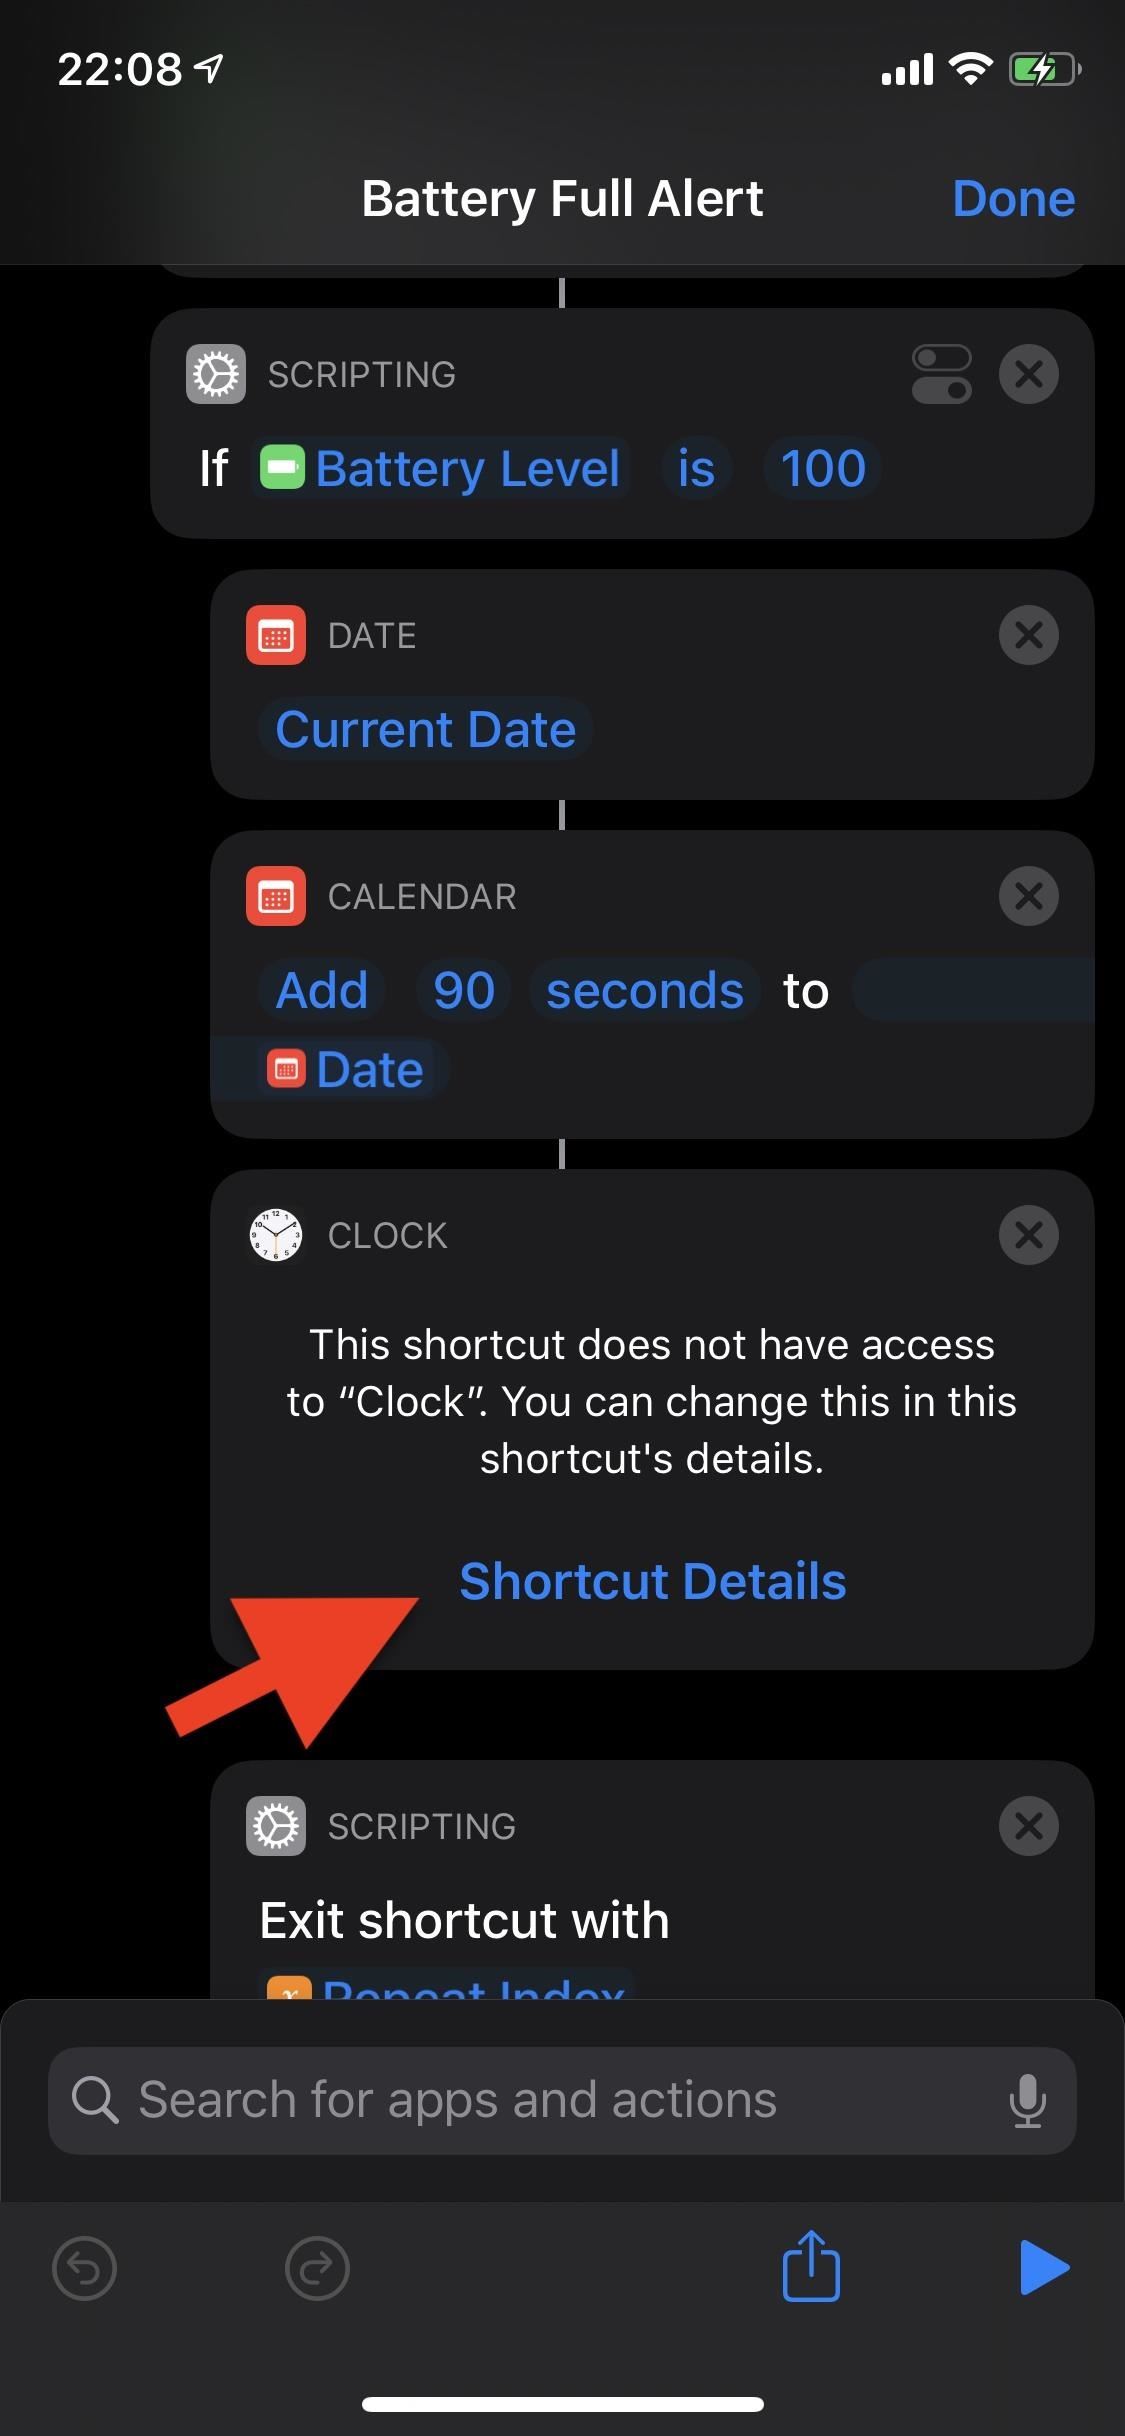 Set an Alarm on Your iPhone for When Your Battery Reaches Full Charge